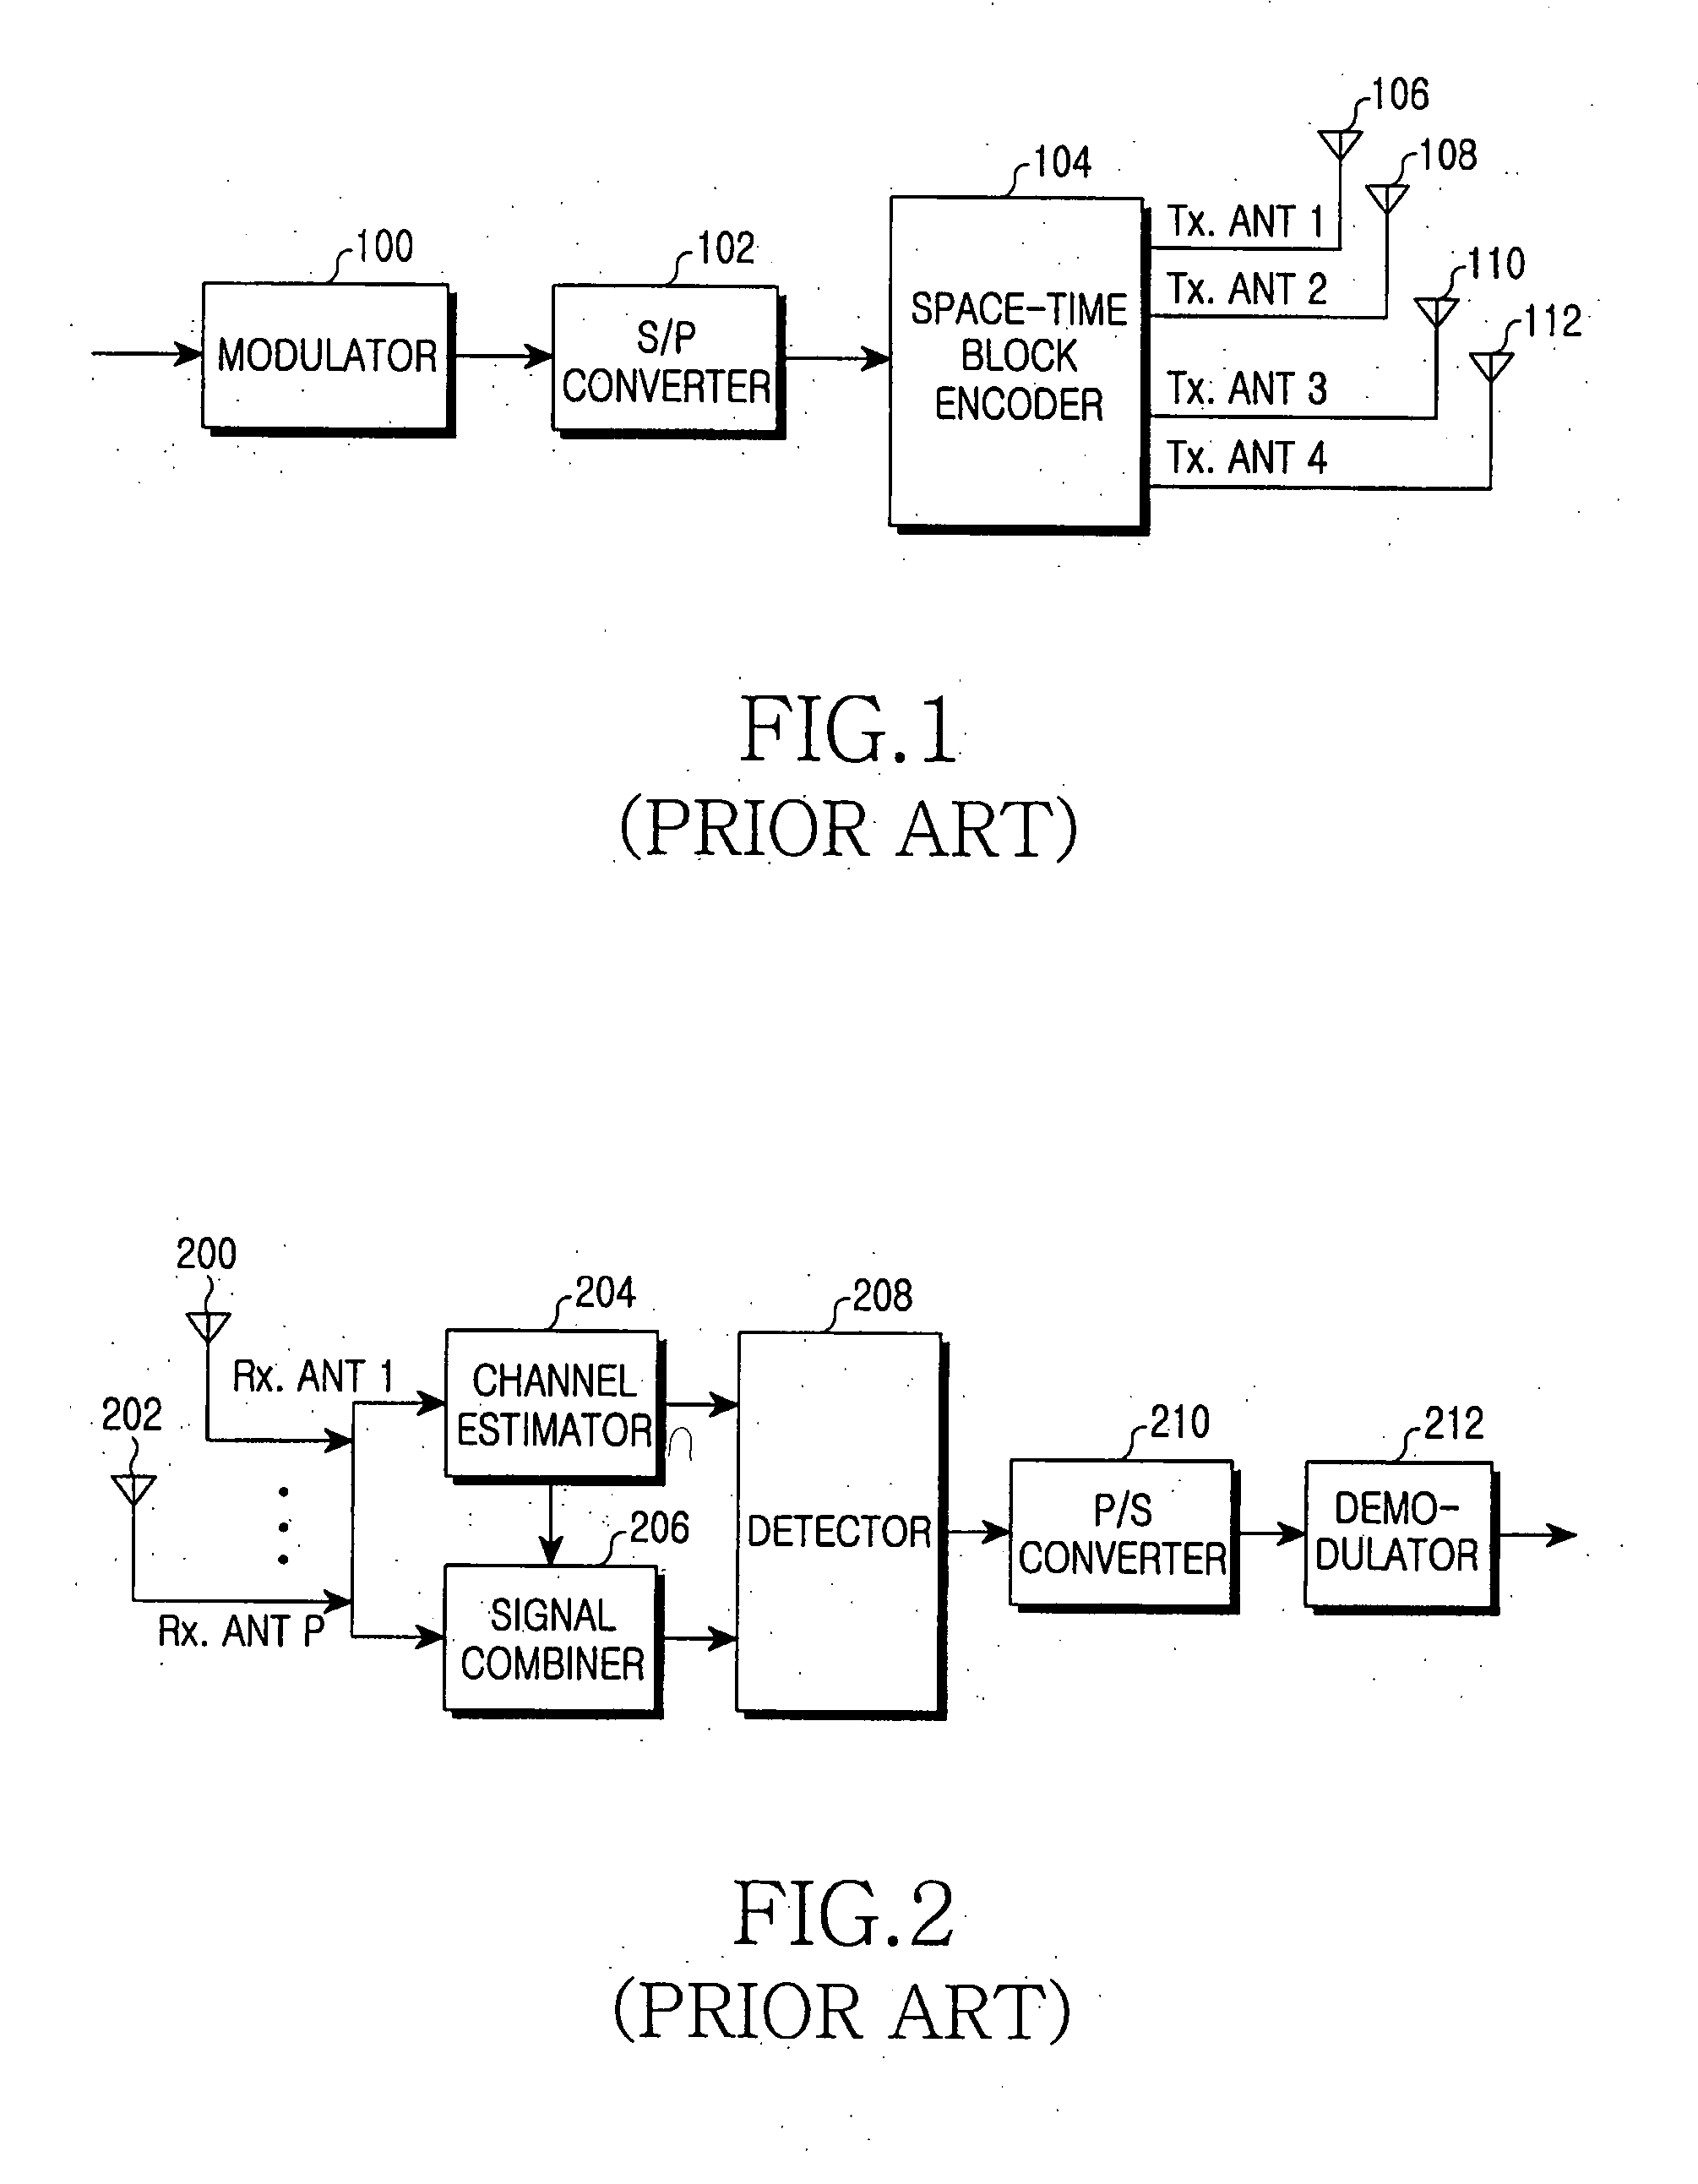 Apparatus and method for transmitting/receiving a signal in a mobile communication system using a multiple-input multiple-output scheme